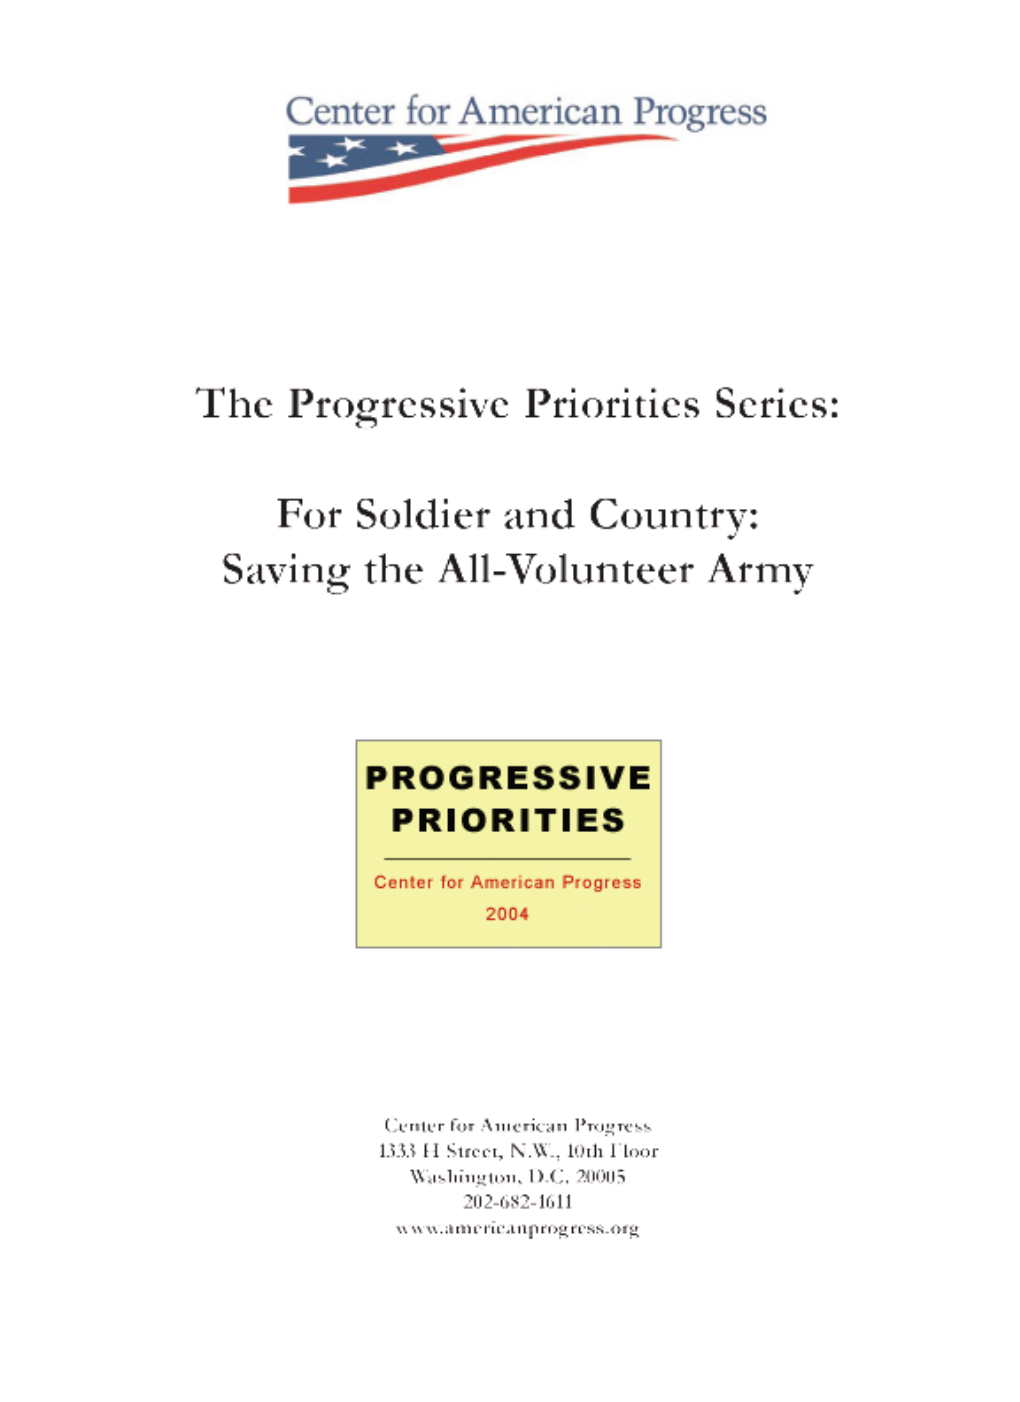 Saving the All-Volunteer Army Is the Fourth of Approximately a Dozen Papers in the Series That American Progress Will Issue Over the Course of the Next Two Months